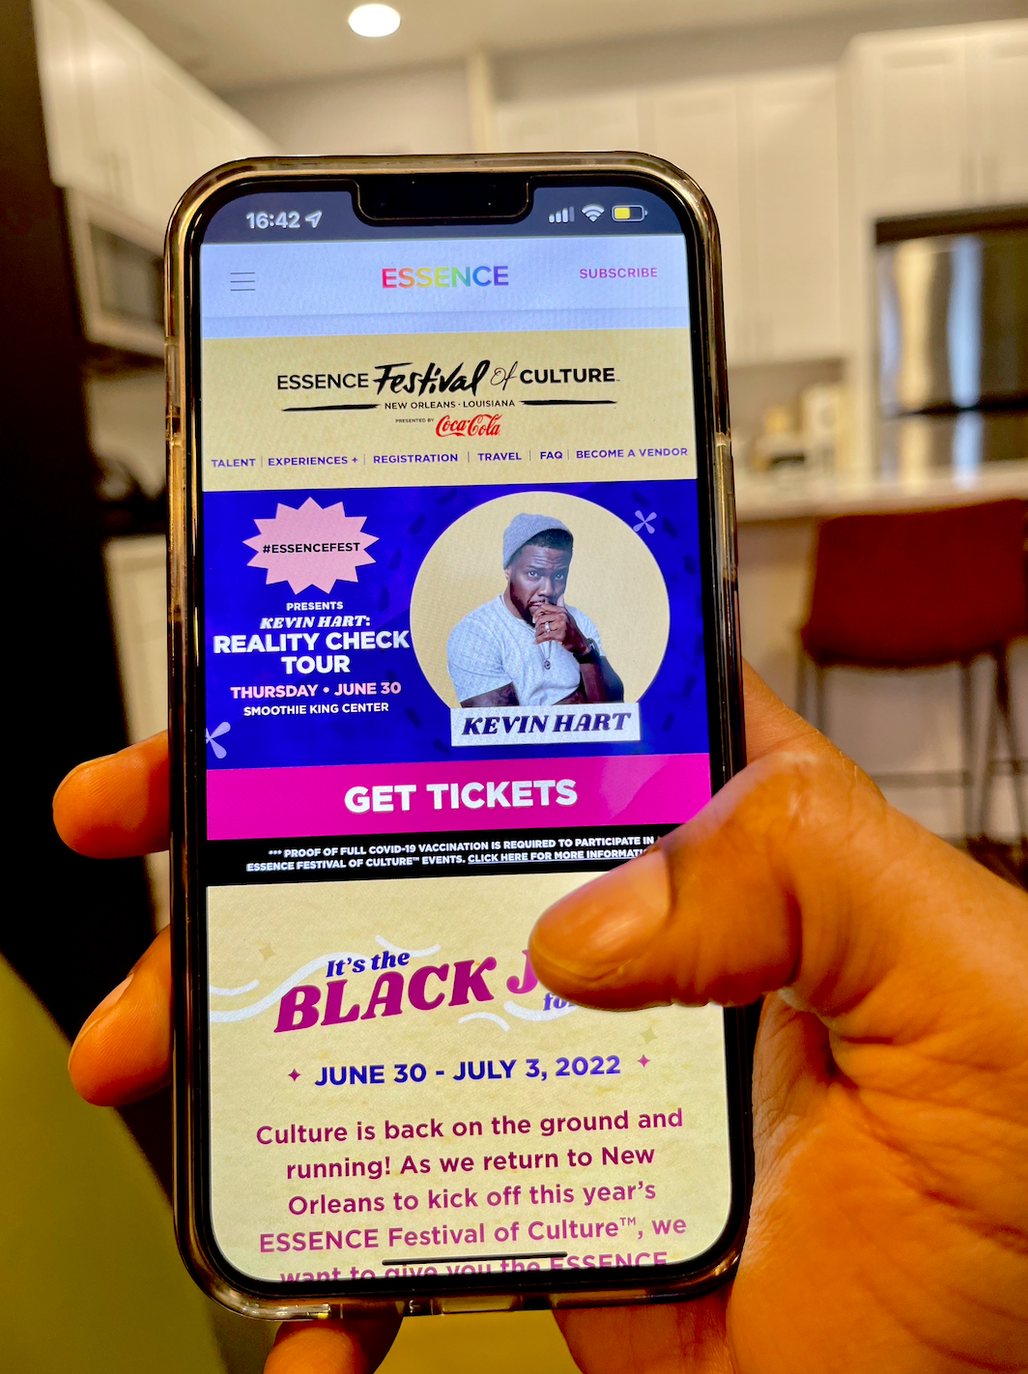 Get tickets on mobile for ESSENCE Festival of Culture